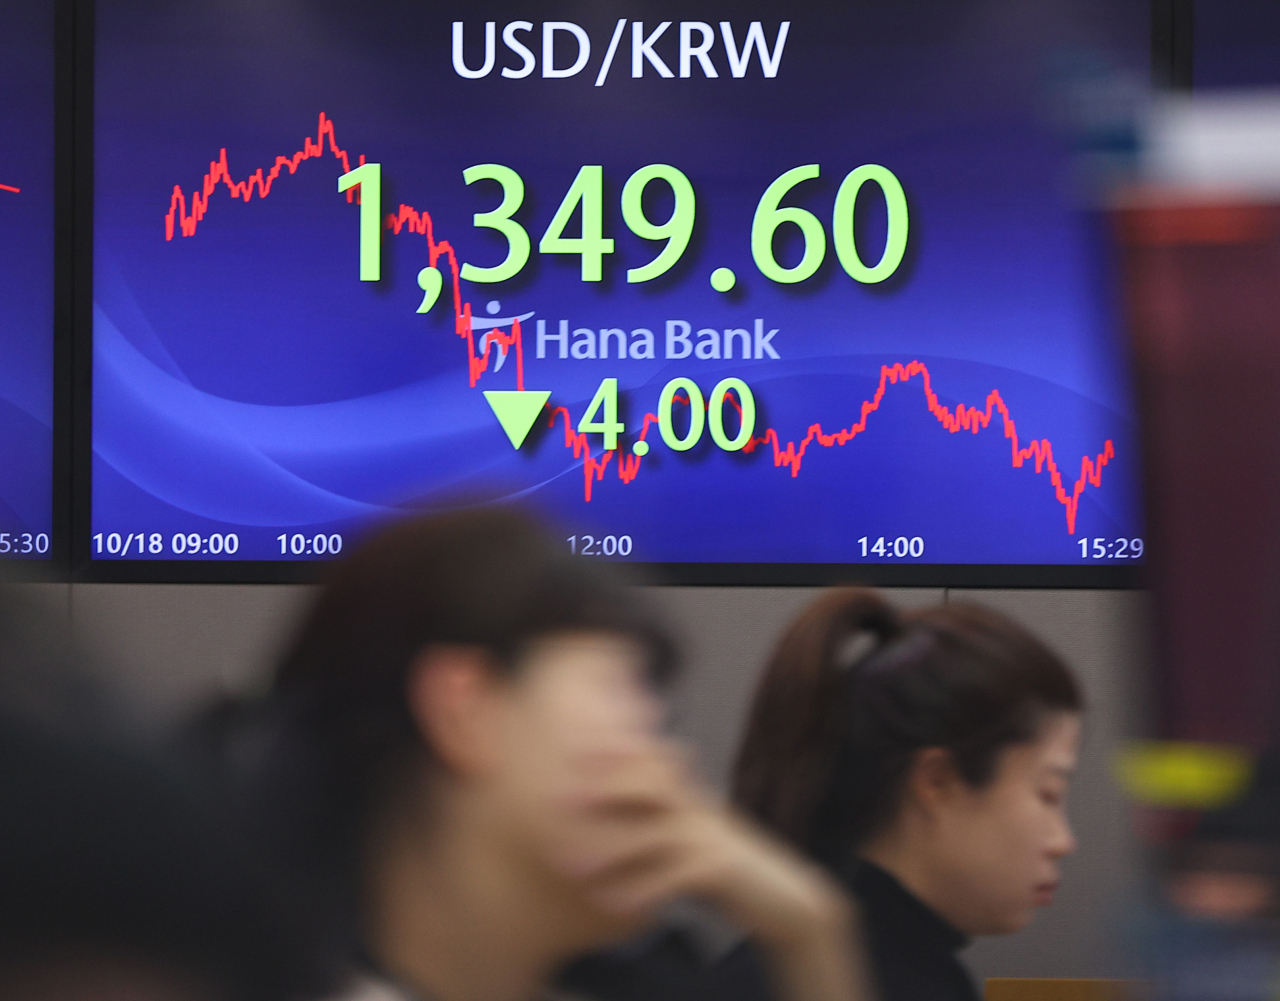 An electronic signboard at a Hana Bank trading room in Seoul shows the Korean won against the US dollar closing at 1,349.6 won, Wednesday. (Yonhap)